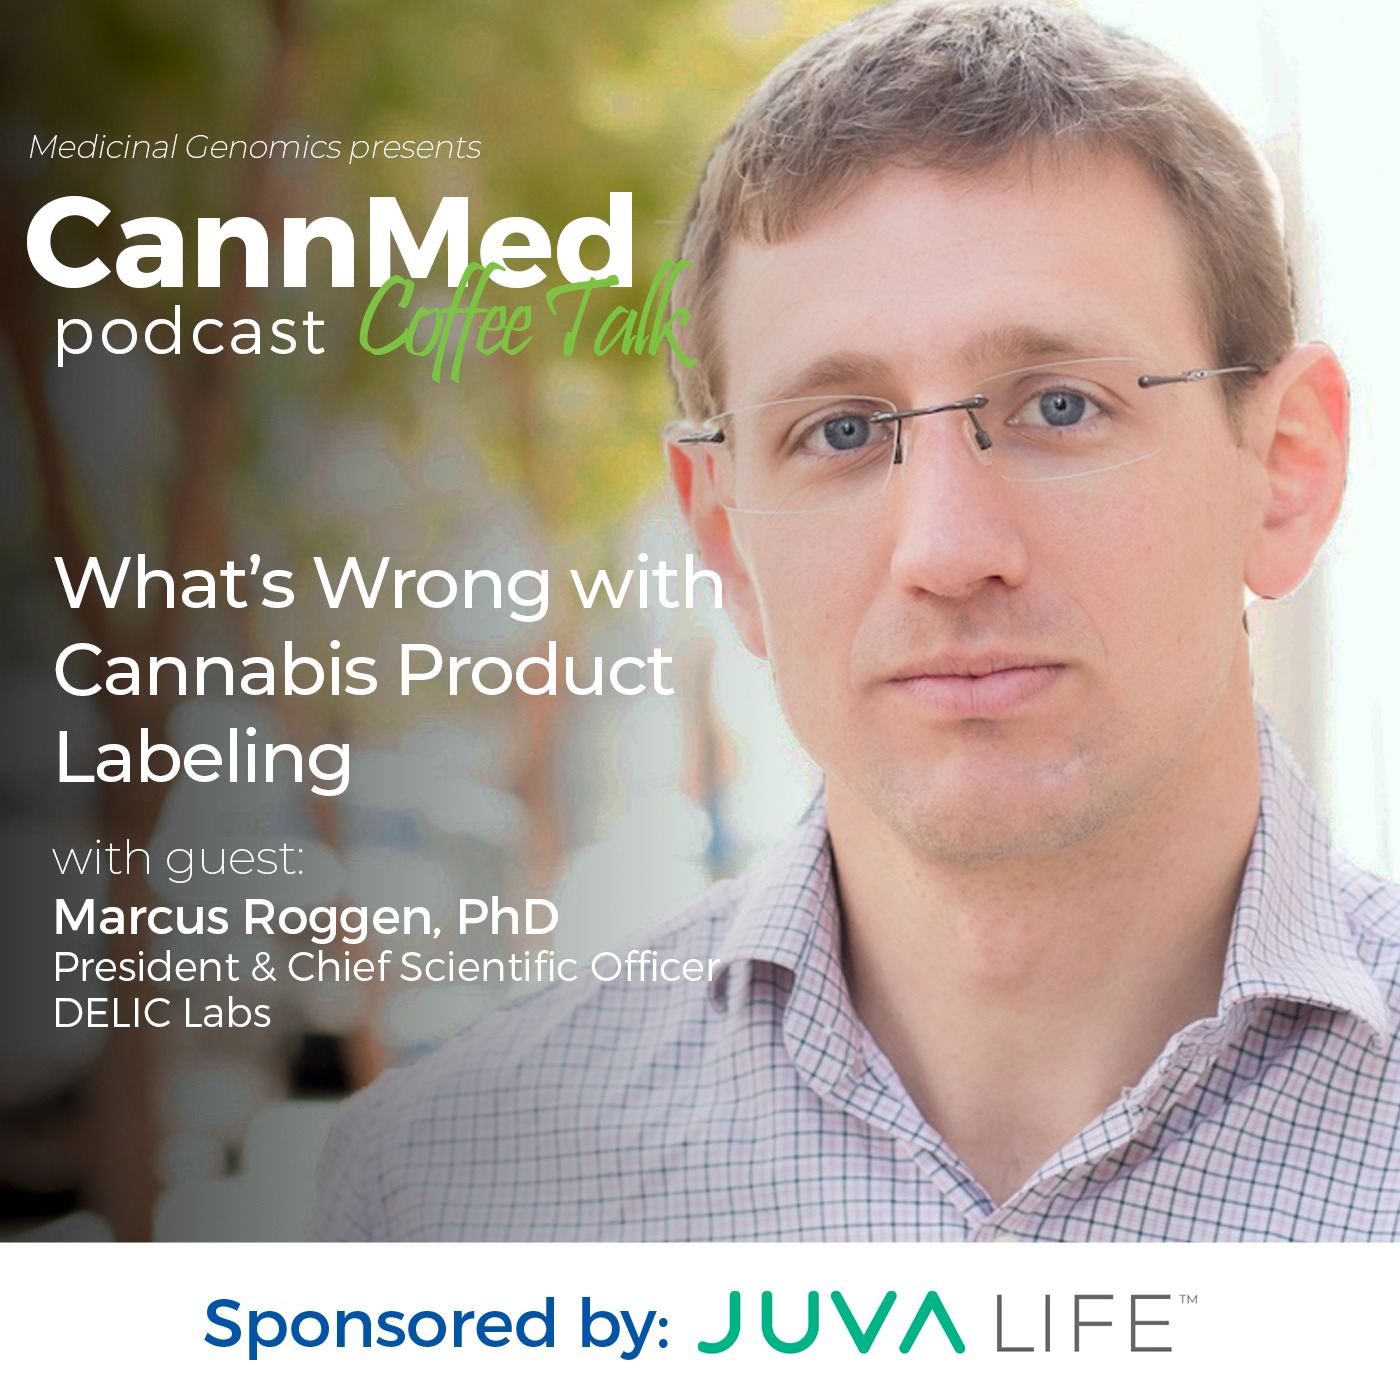 Featured image for “What’s Wrong with Cannabis Product Labeling with Markus Roggen, PhD”